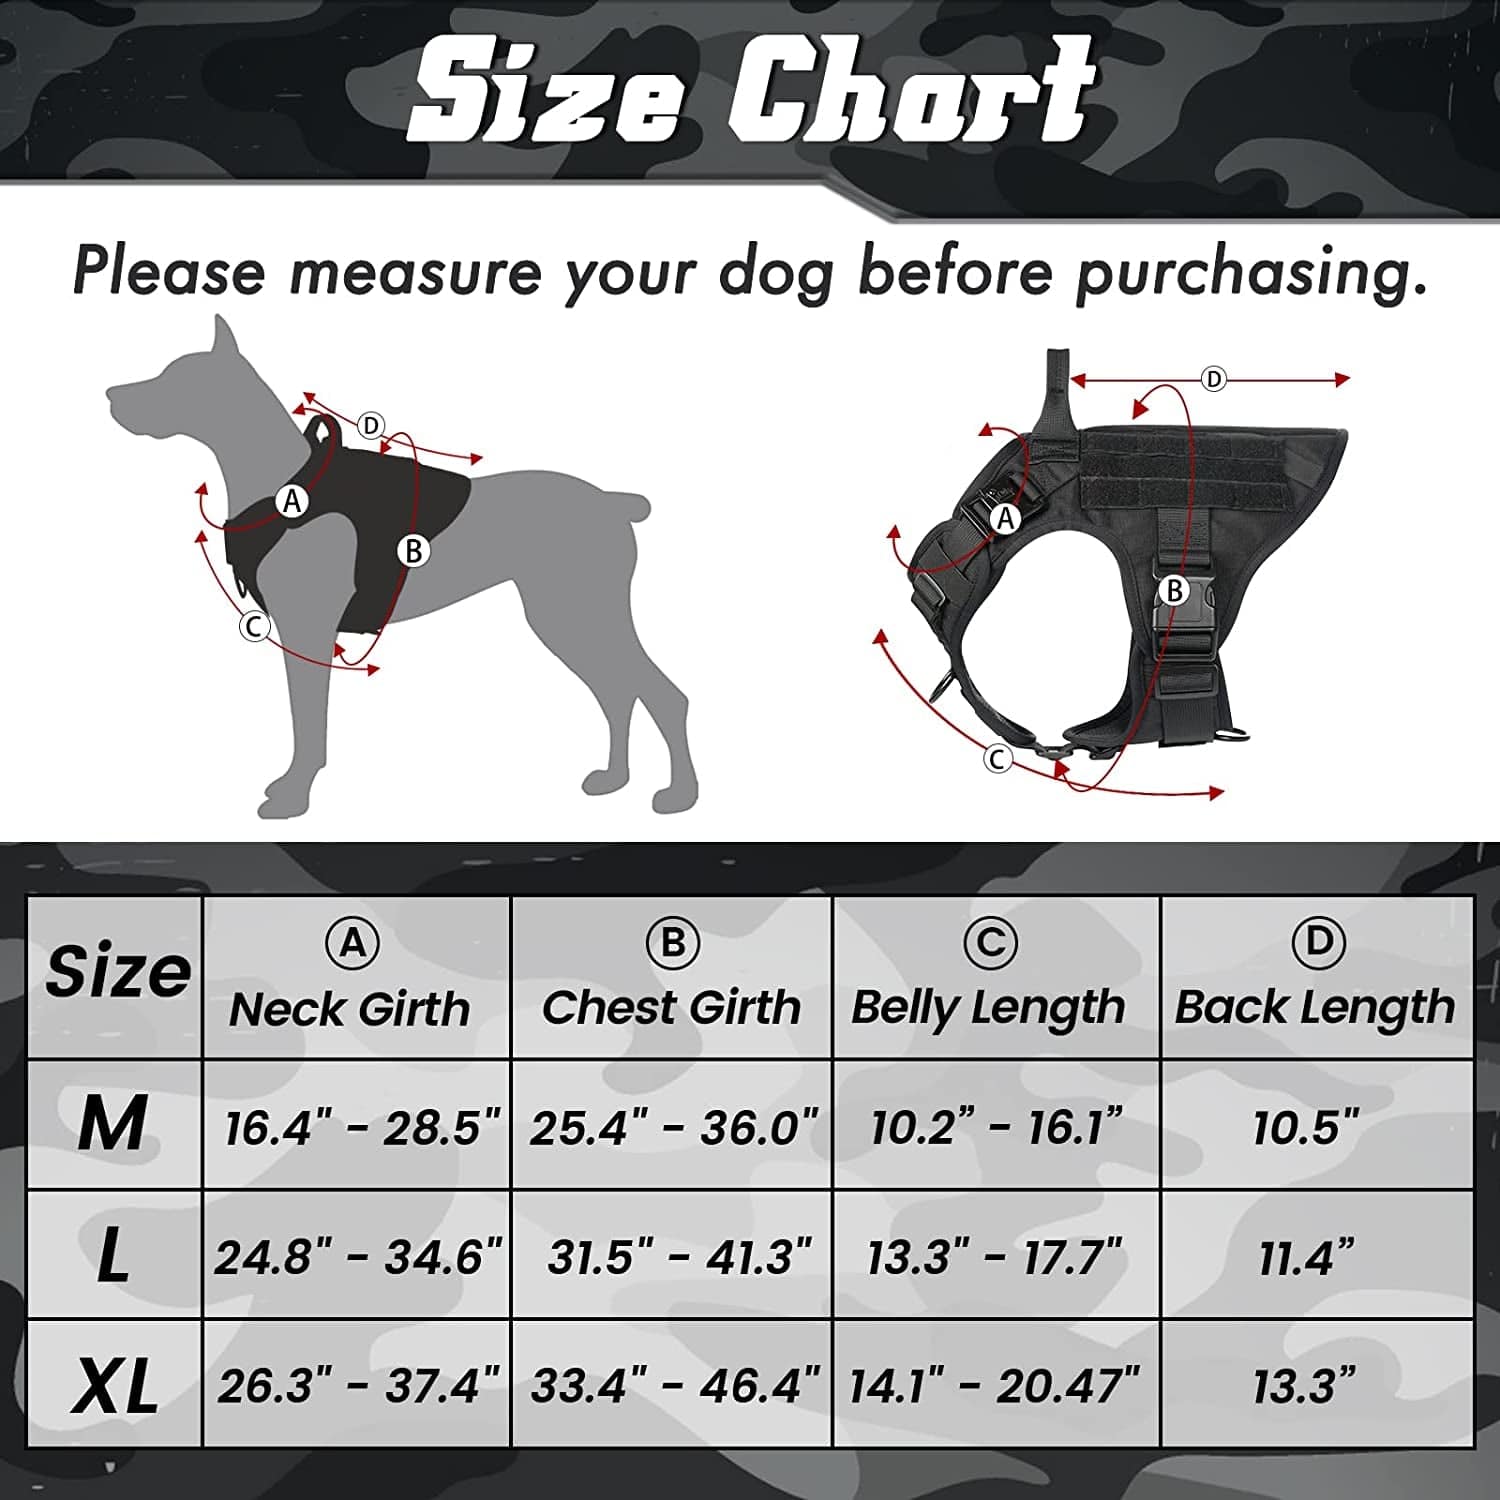 PAWTRENDER Tactical Dog Harness for Large Dogs No Pull, Adjustable Service Dog Vest Harness with Handle, Heavy Duty Big Dog Harness for Walking Running Training Working Hiking, Black, L Animals & Pet Supplies > Pet Supplies > Dog Supplies > Dog Apparel PAWTRENDER   